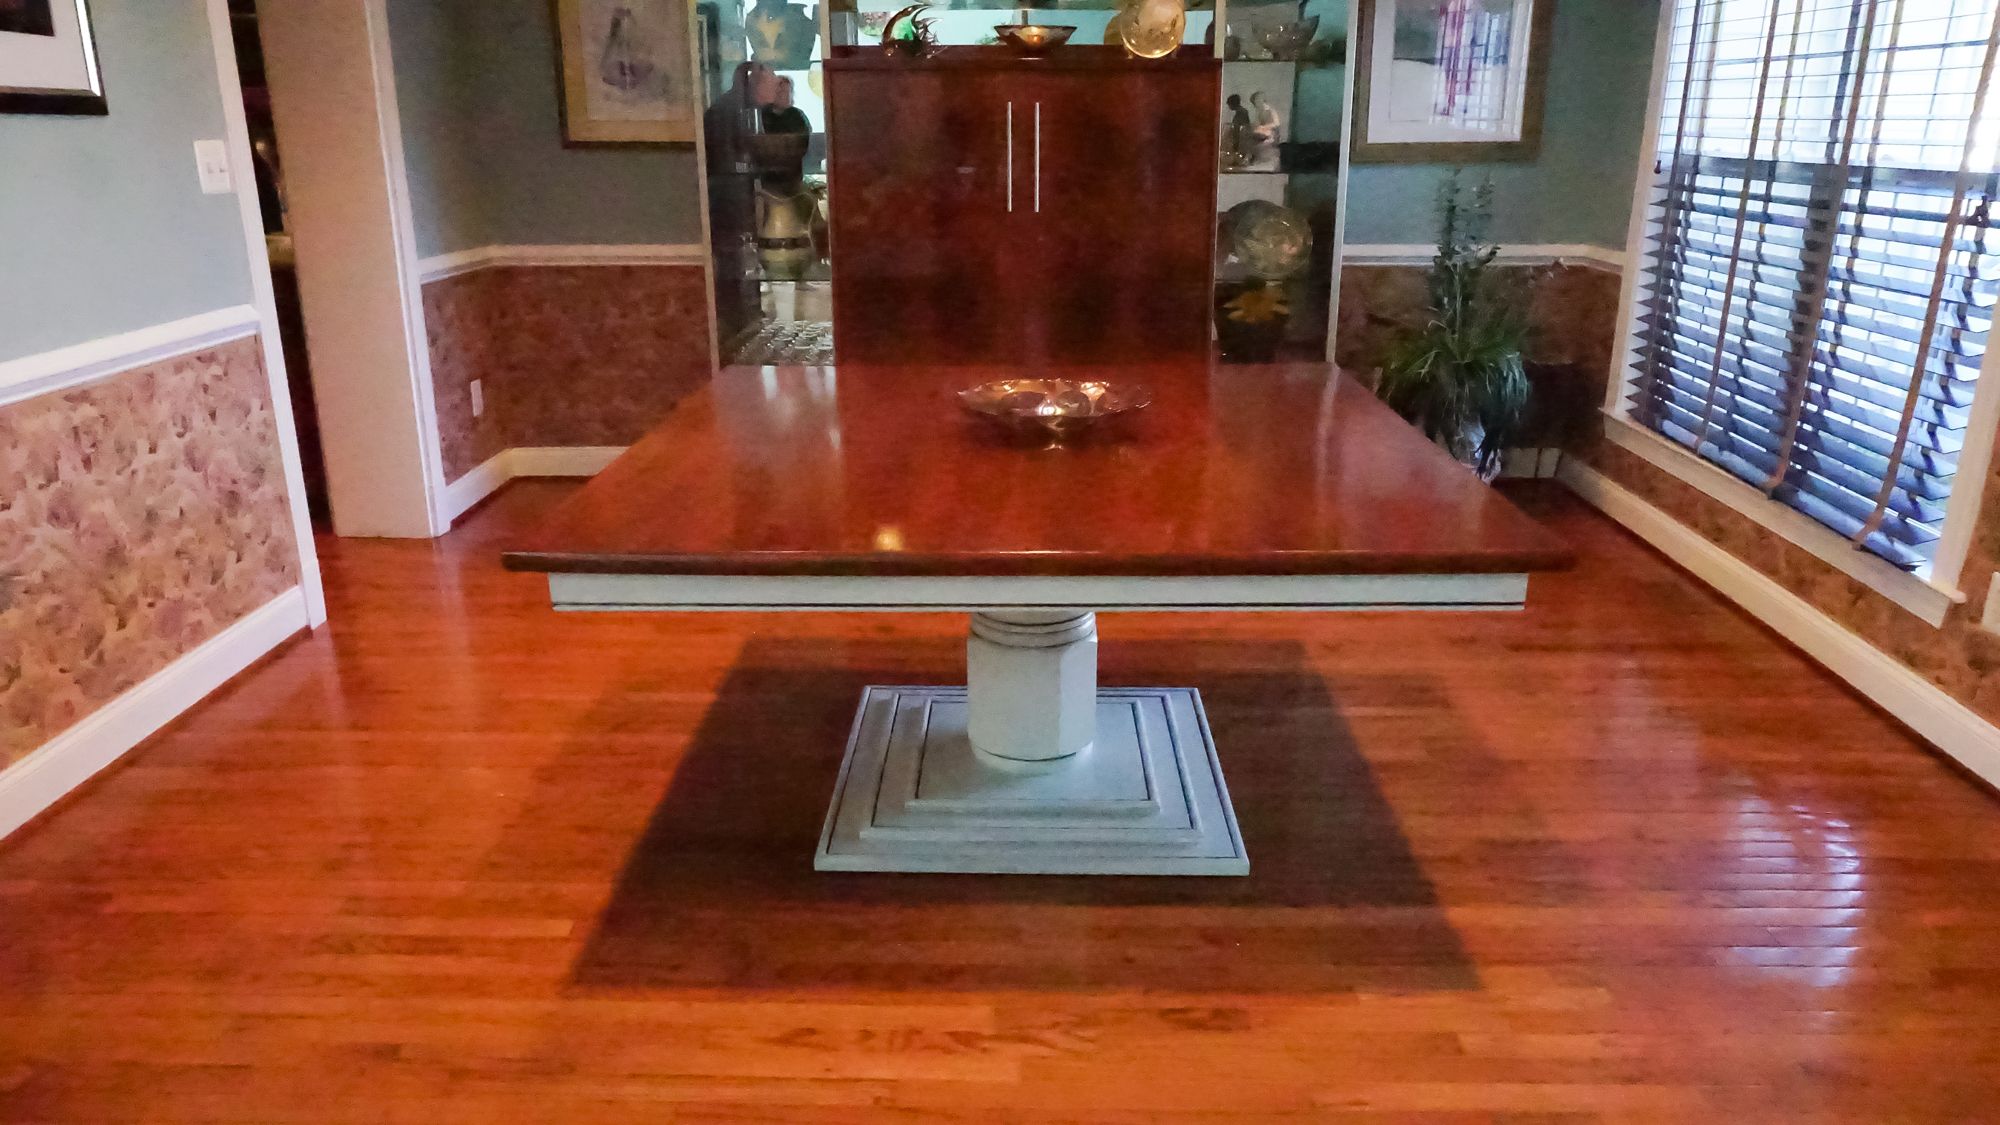 5 X 5 Foot Dining Room Table